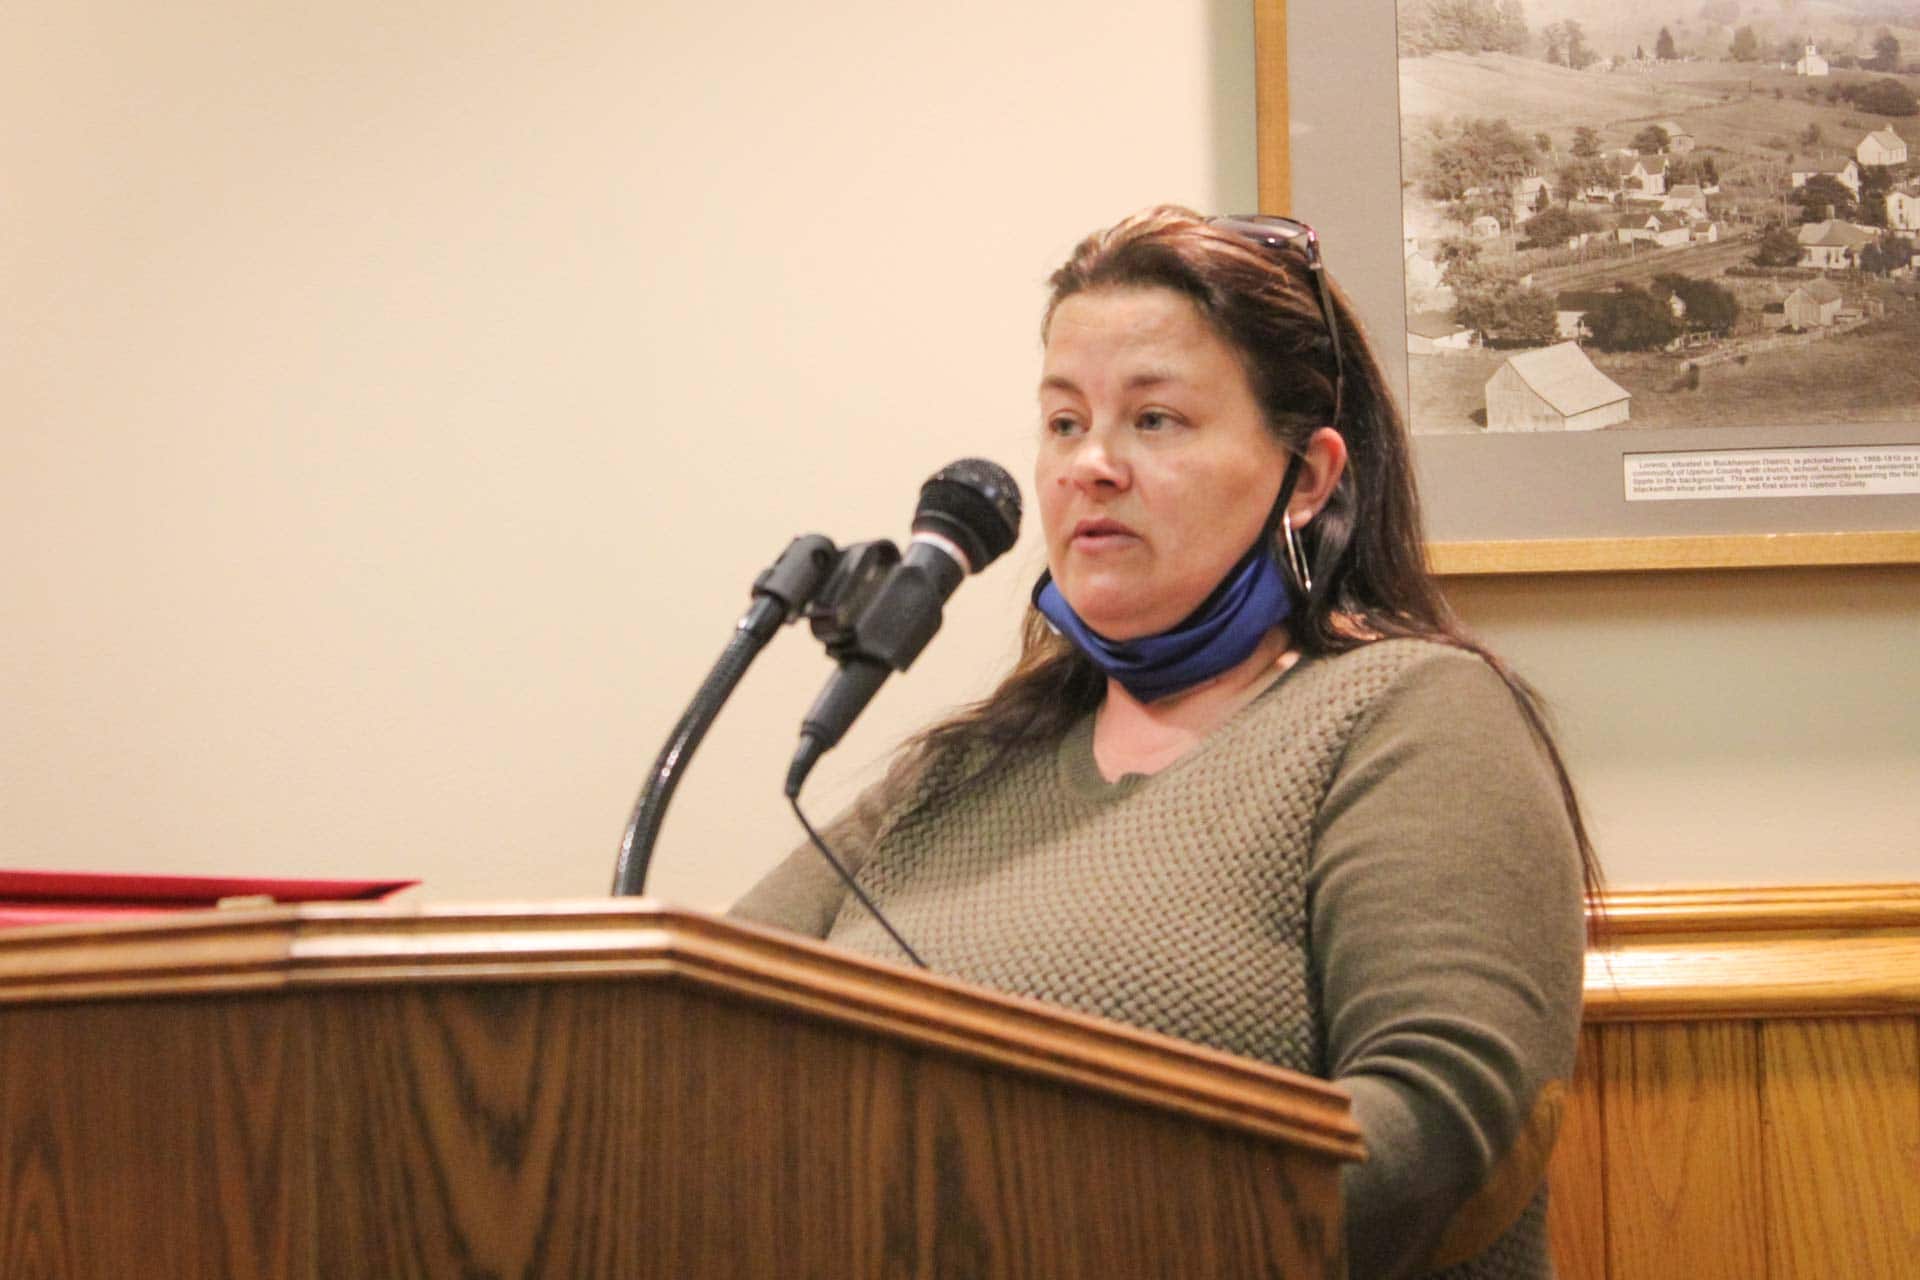 Missy Loudin with ASAP Medical Management addresses the Upshur County Commission.